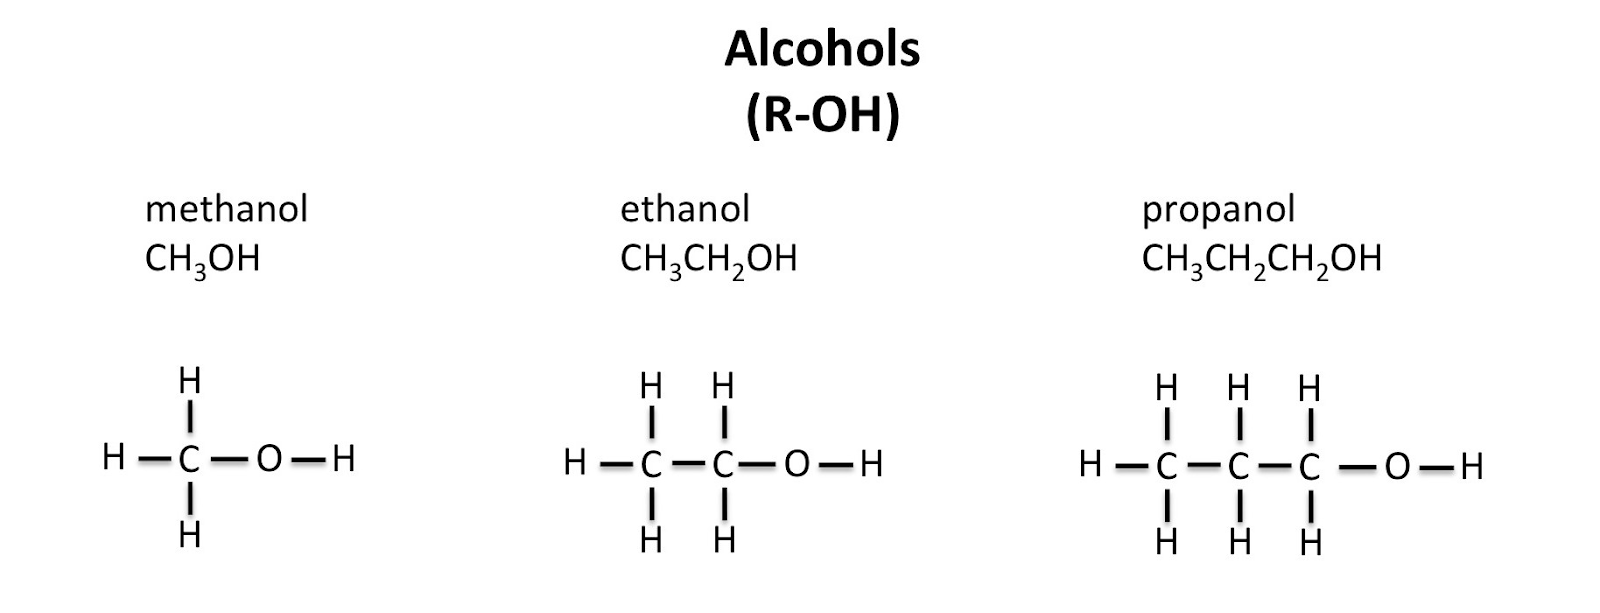 Alcohols and Carboxylic Acids, figure 2